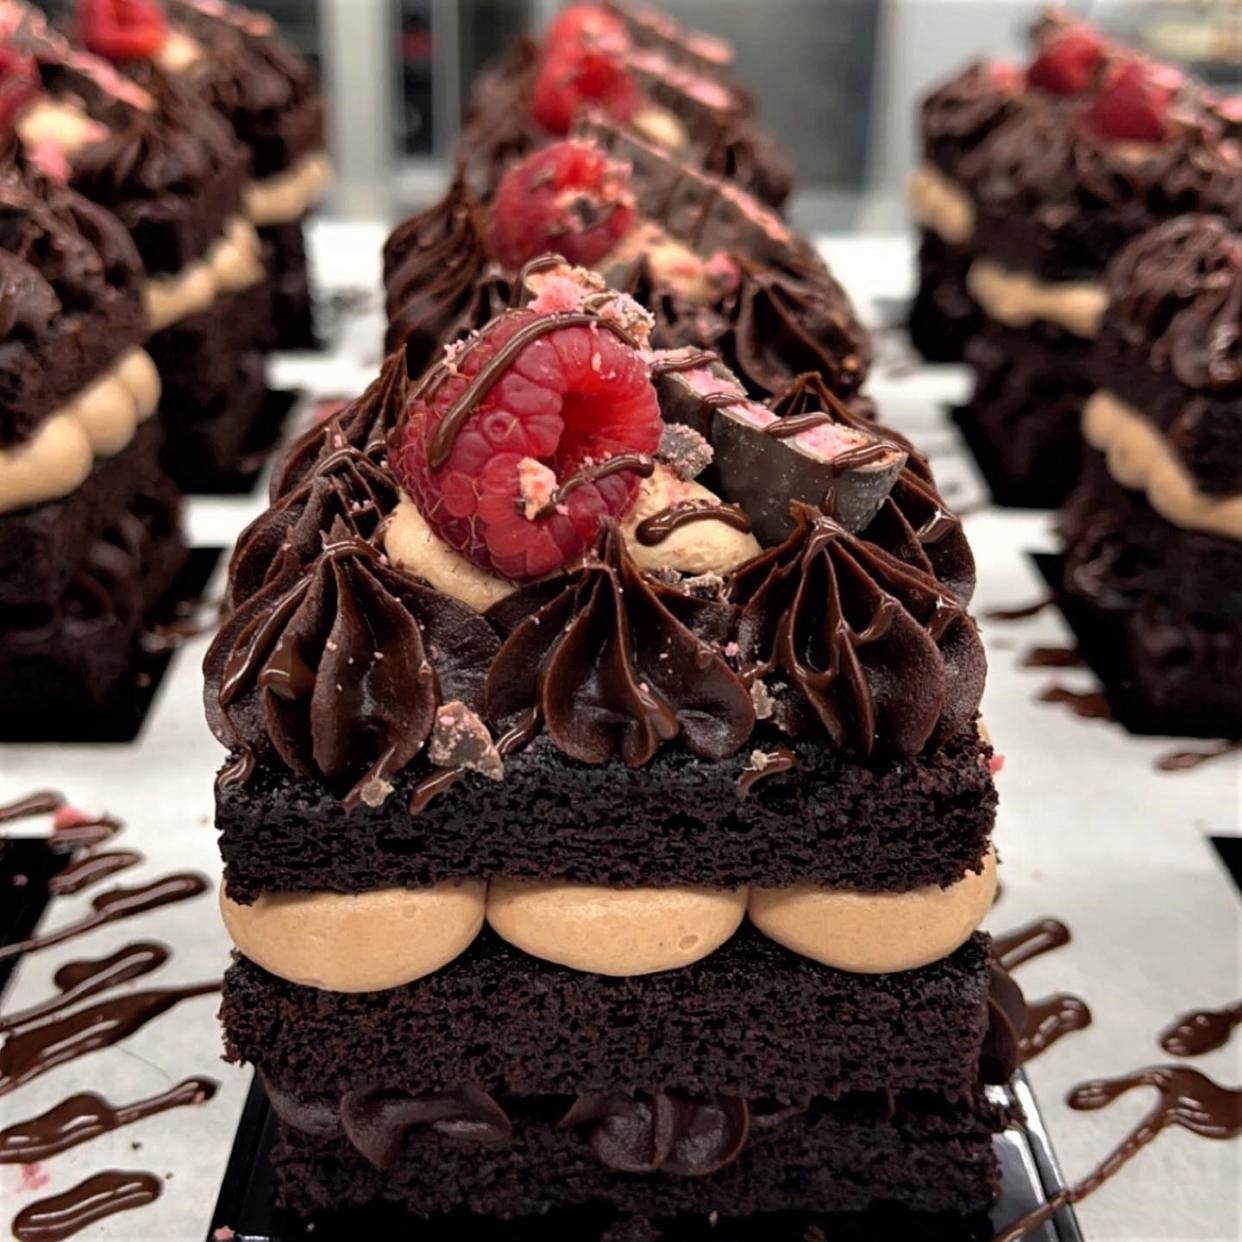 A chocolate raspberry mousse torte was one of the items offered in February at Bea Sweet Treats' Desserts after Dark.